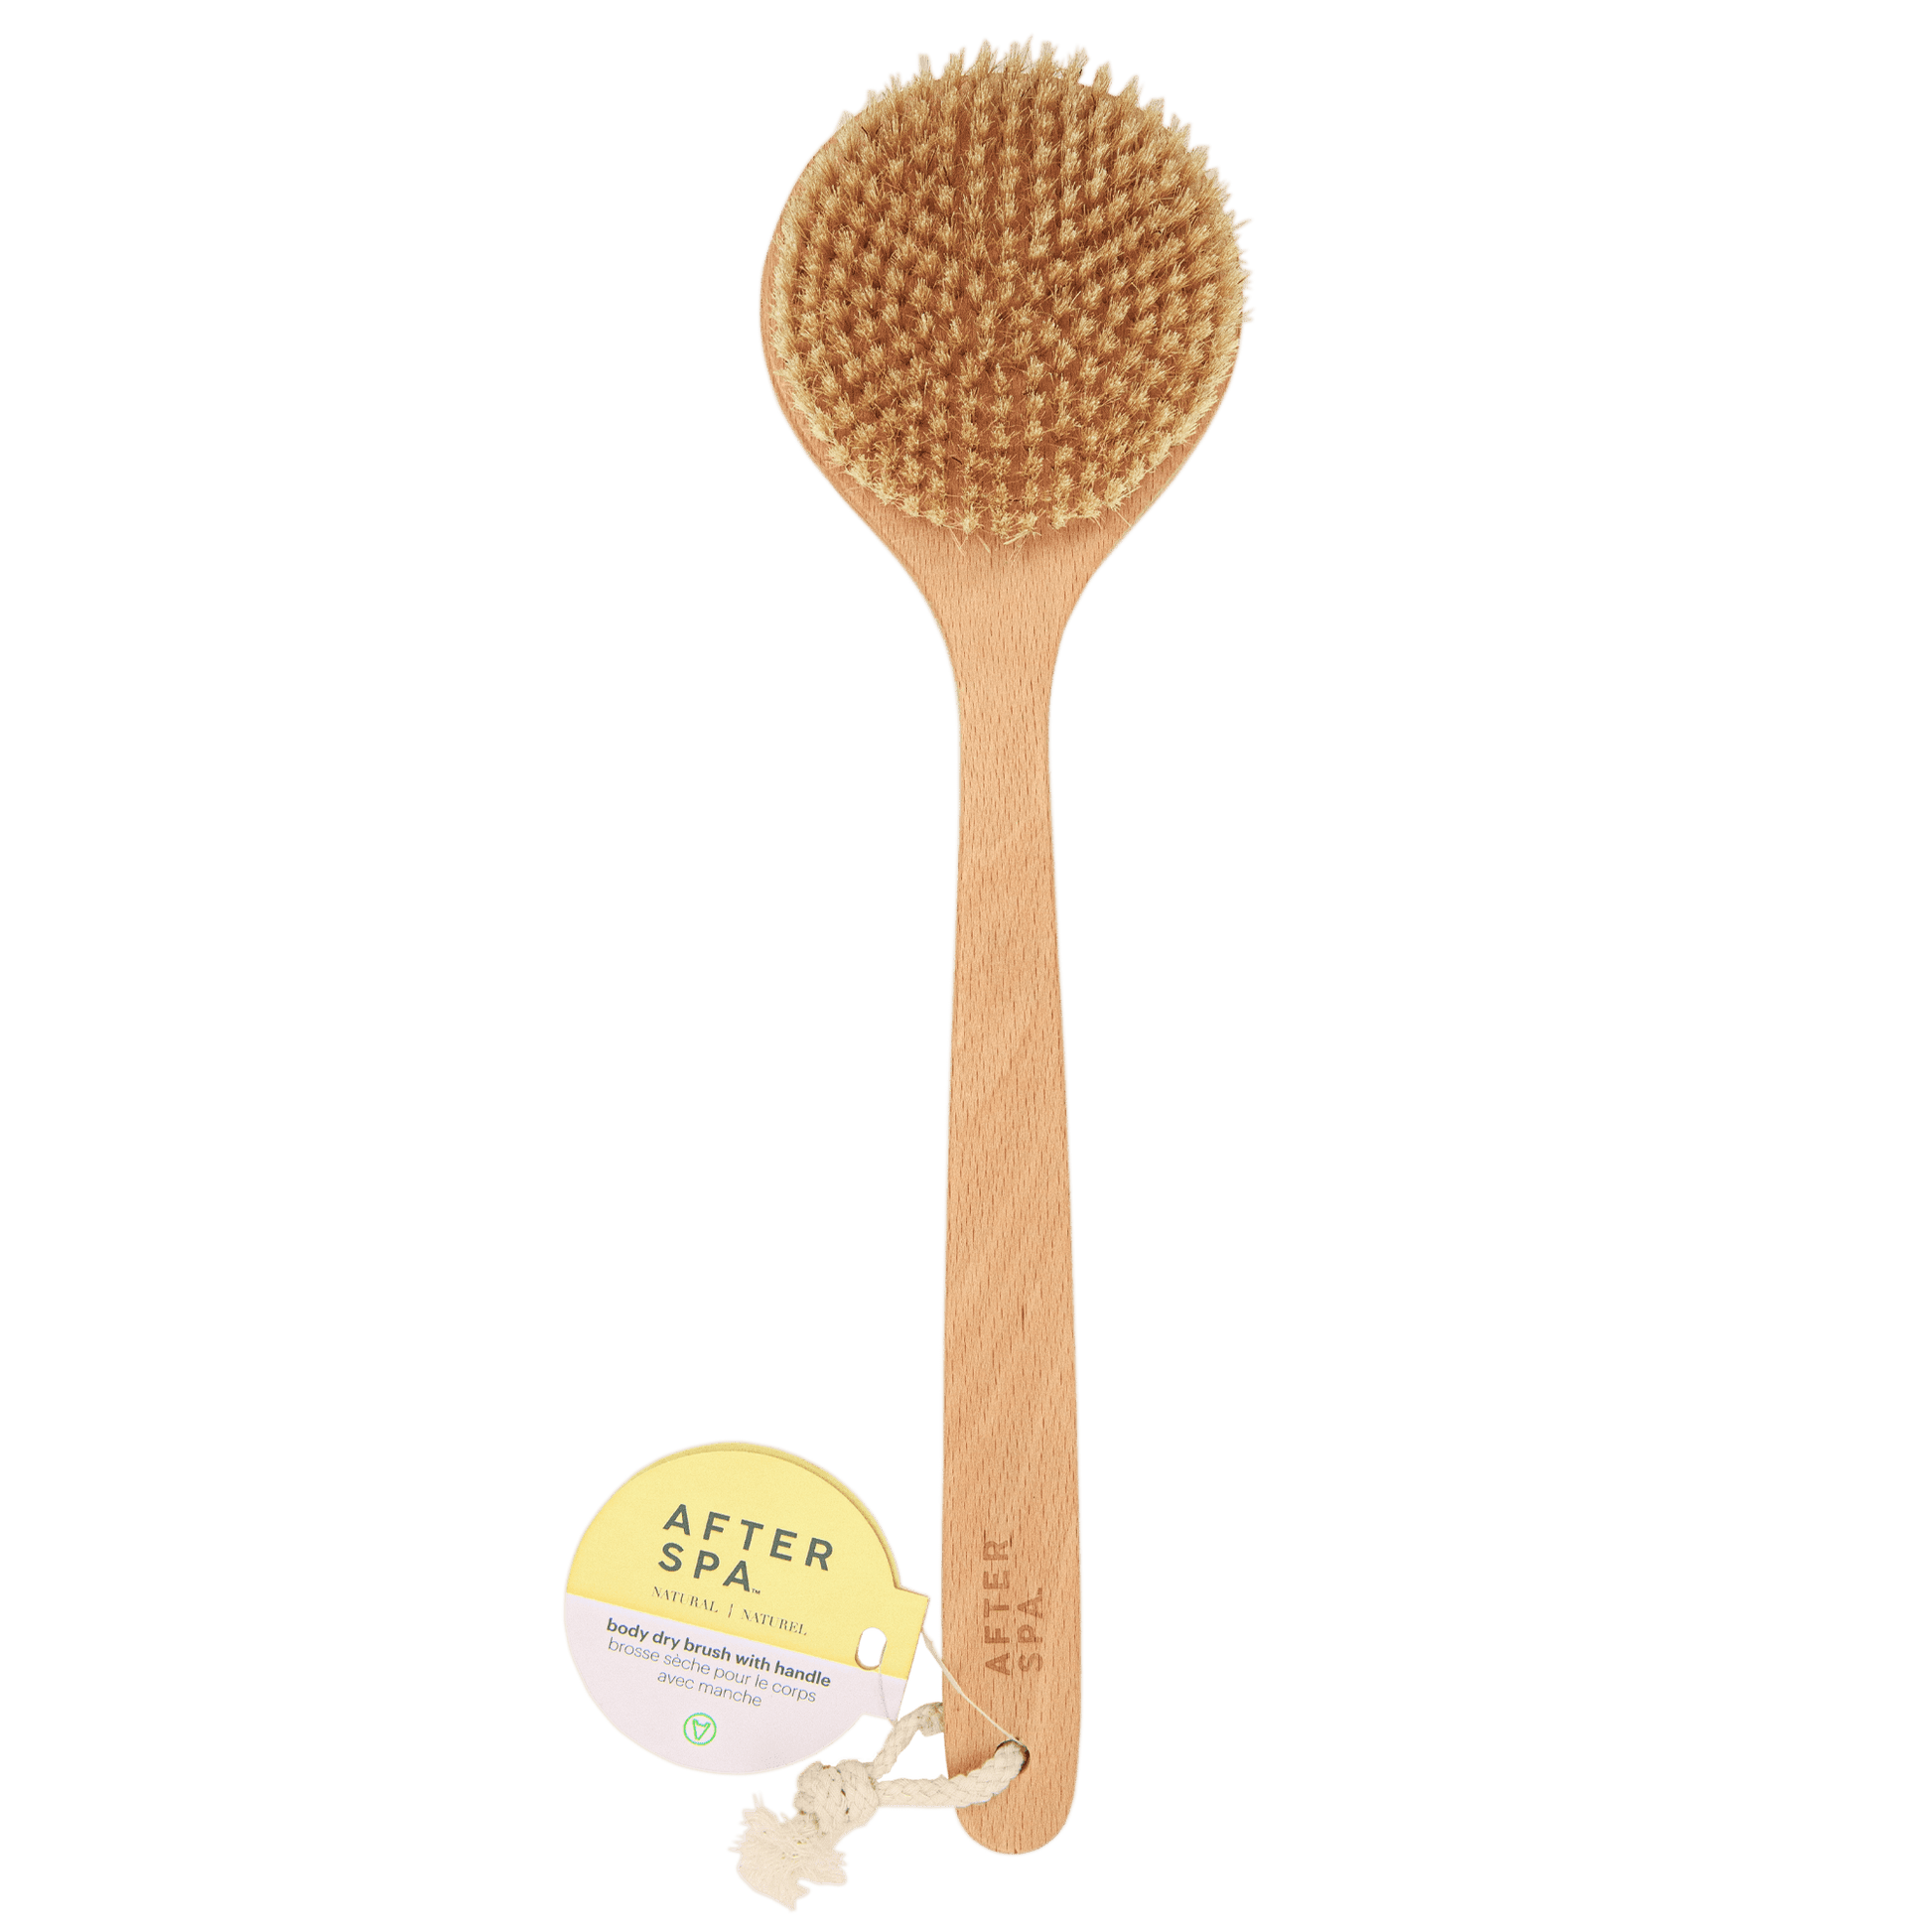 Afterspa Body Dry Brush With Handle | to exfoliate the body.